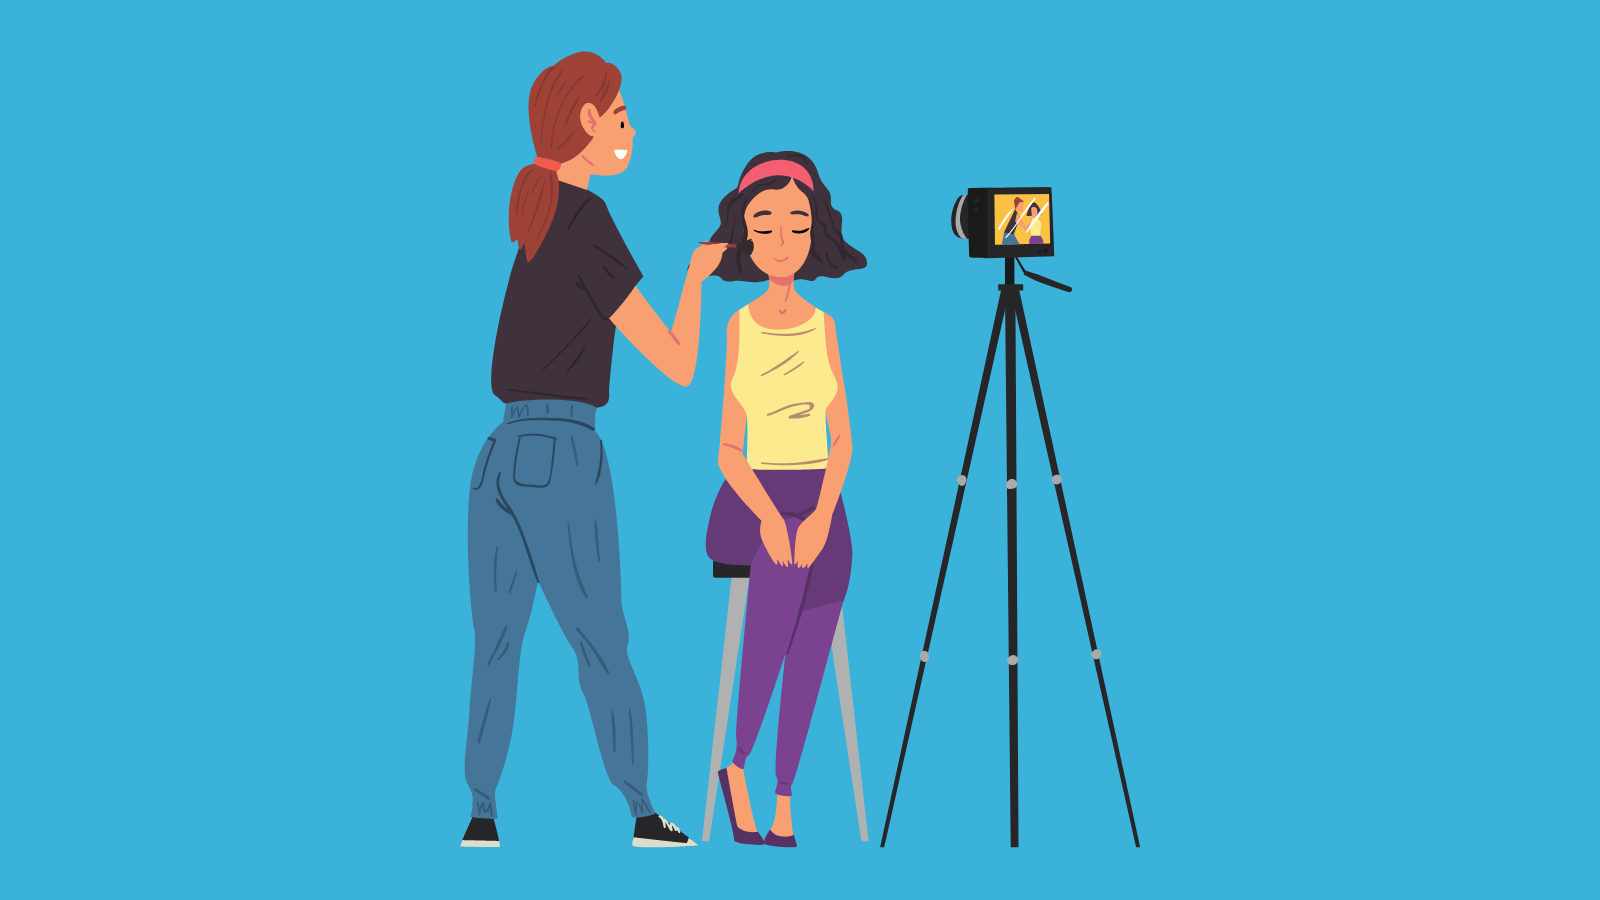 A woman putting blush on a young girl while a camera records